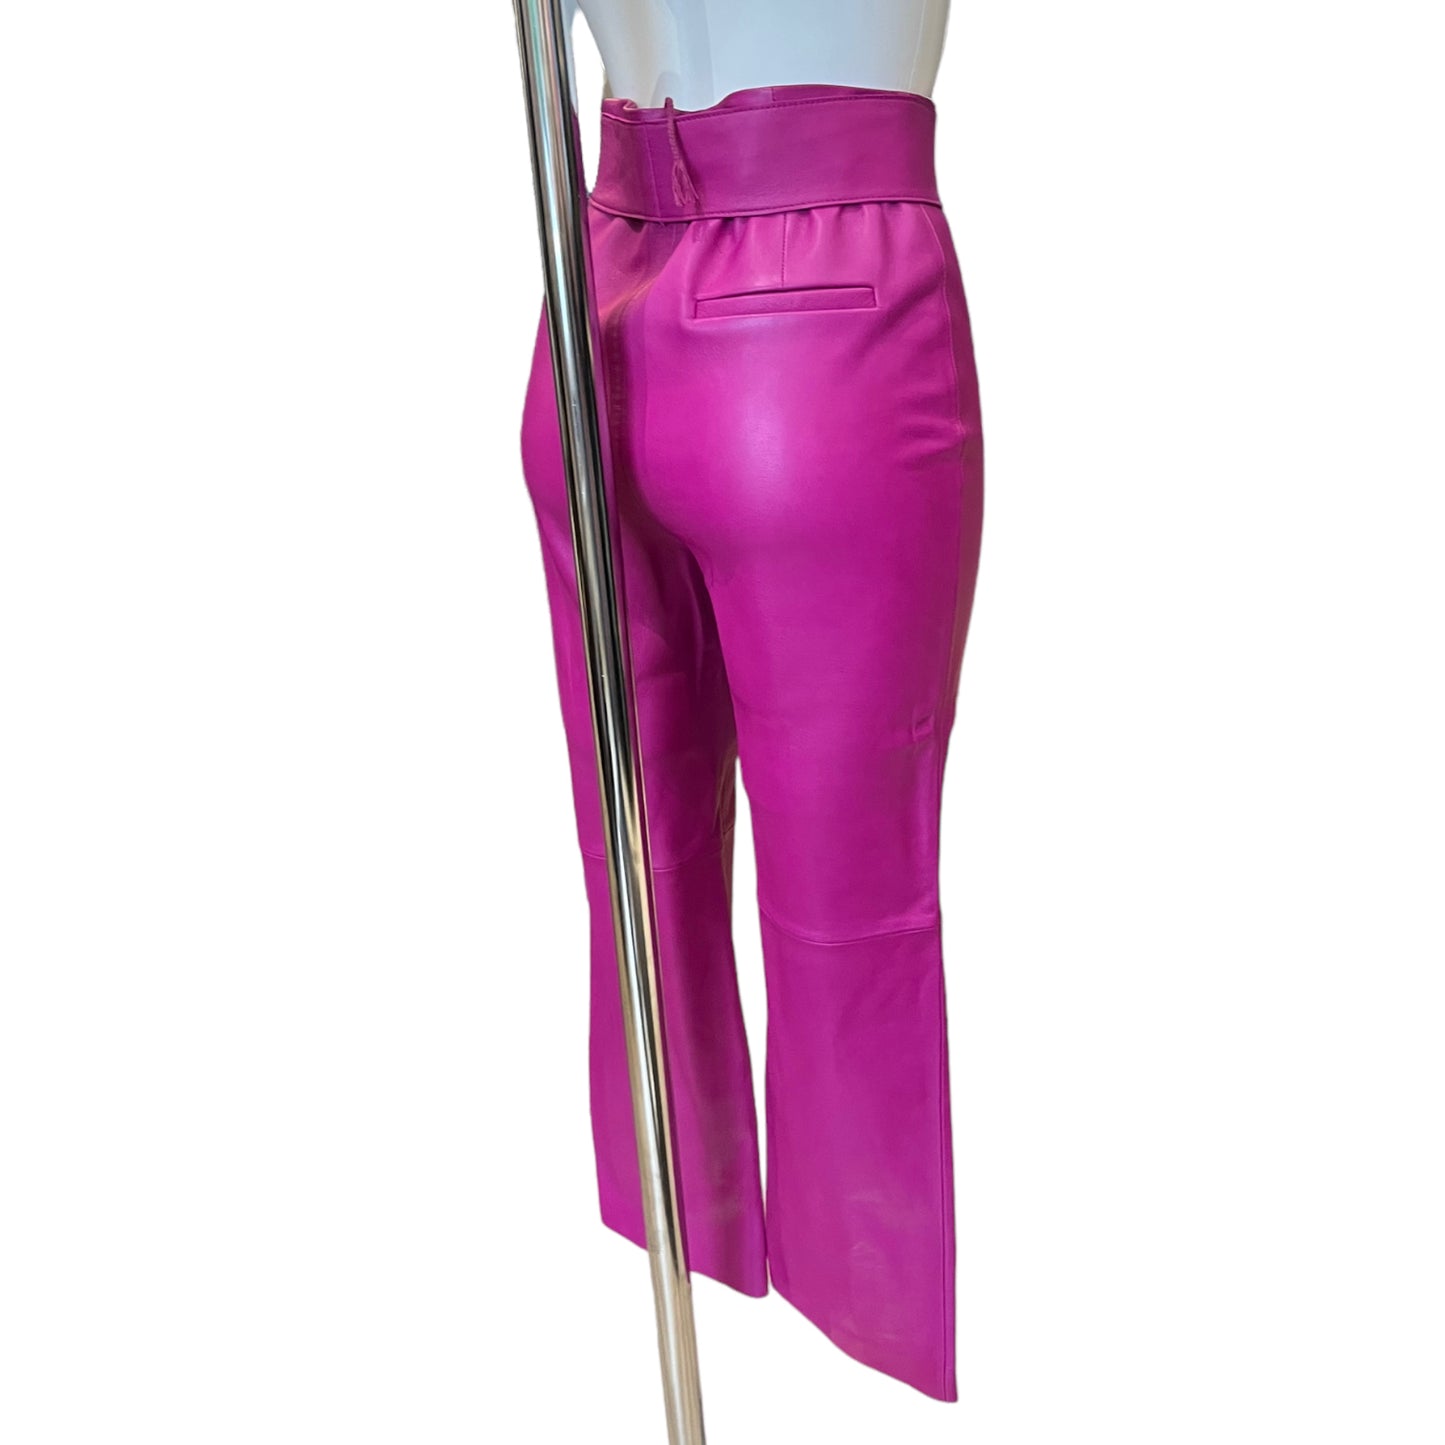 Uterque Pink Leather Trousers